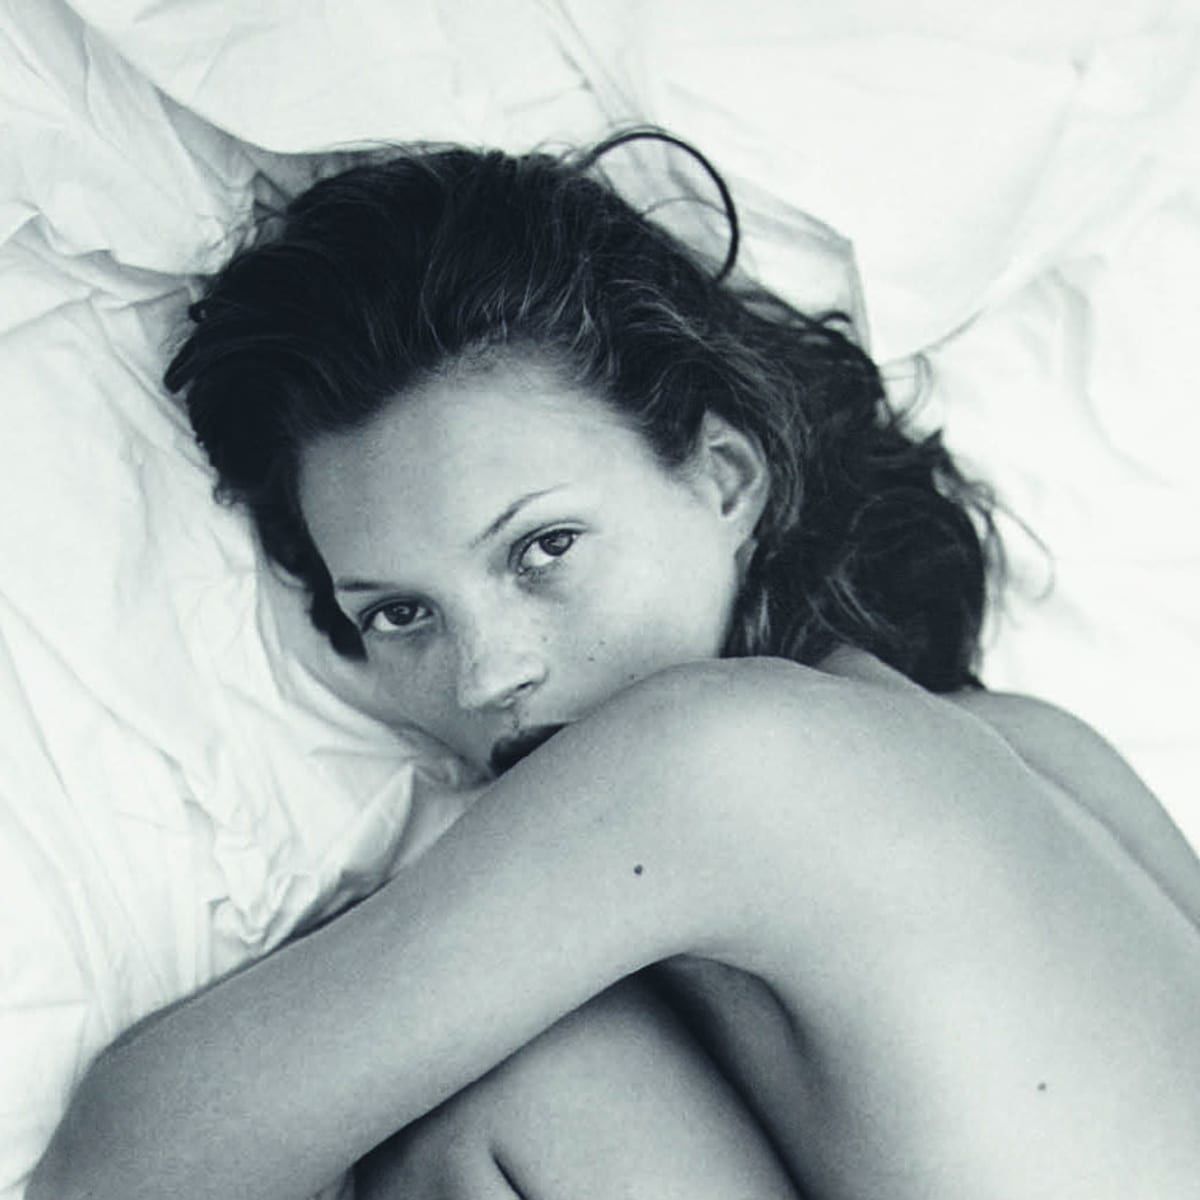 Kate Moss: A photographer asked me to strip when I was 15